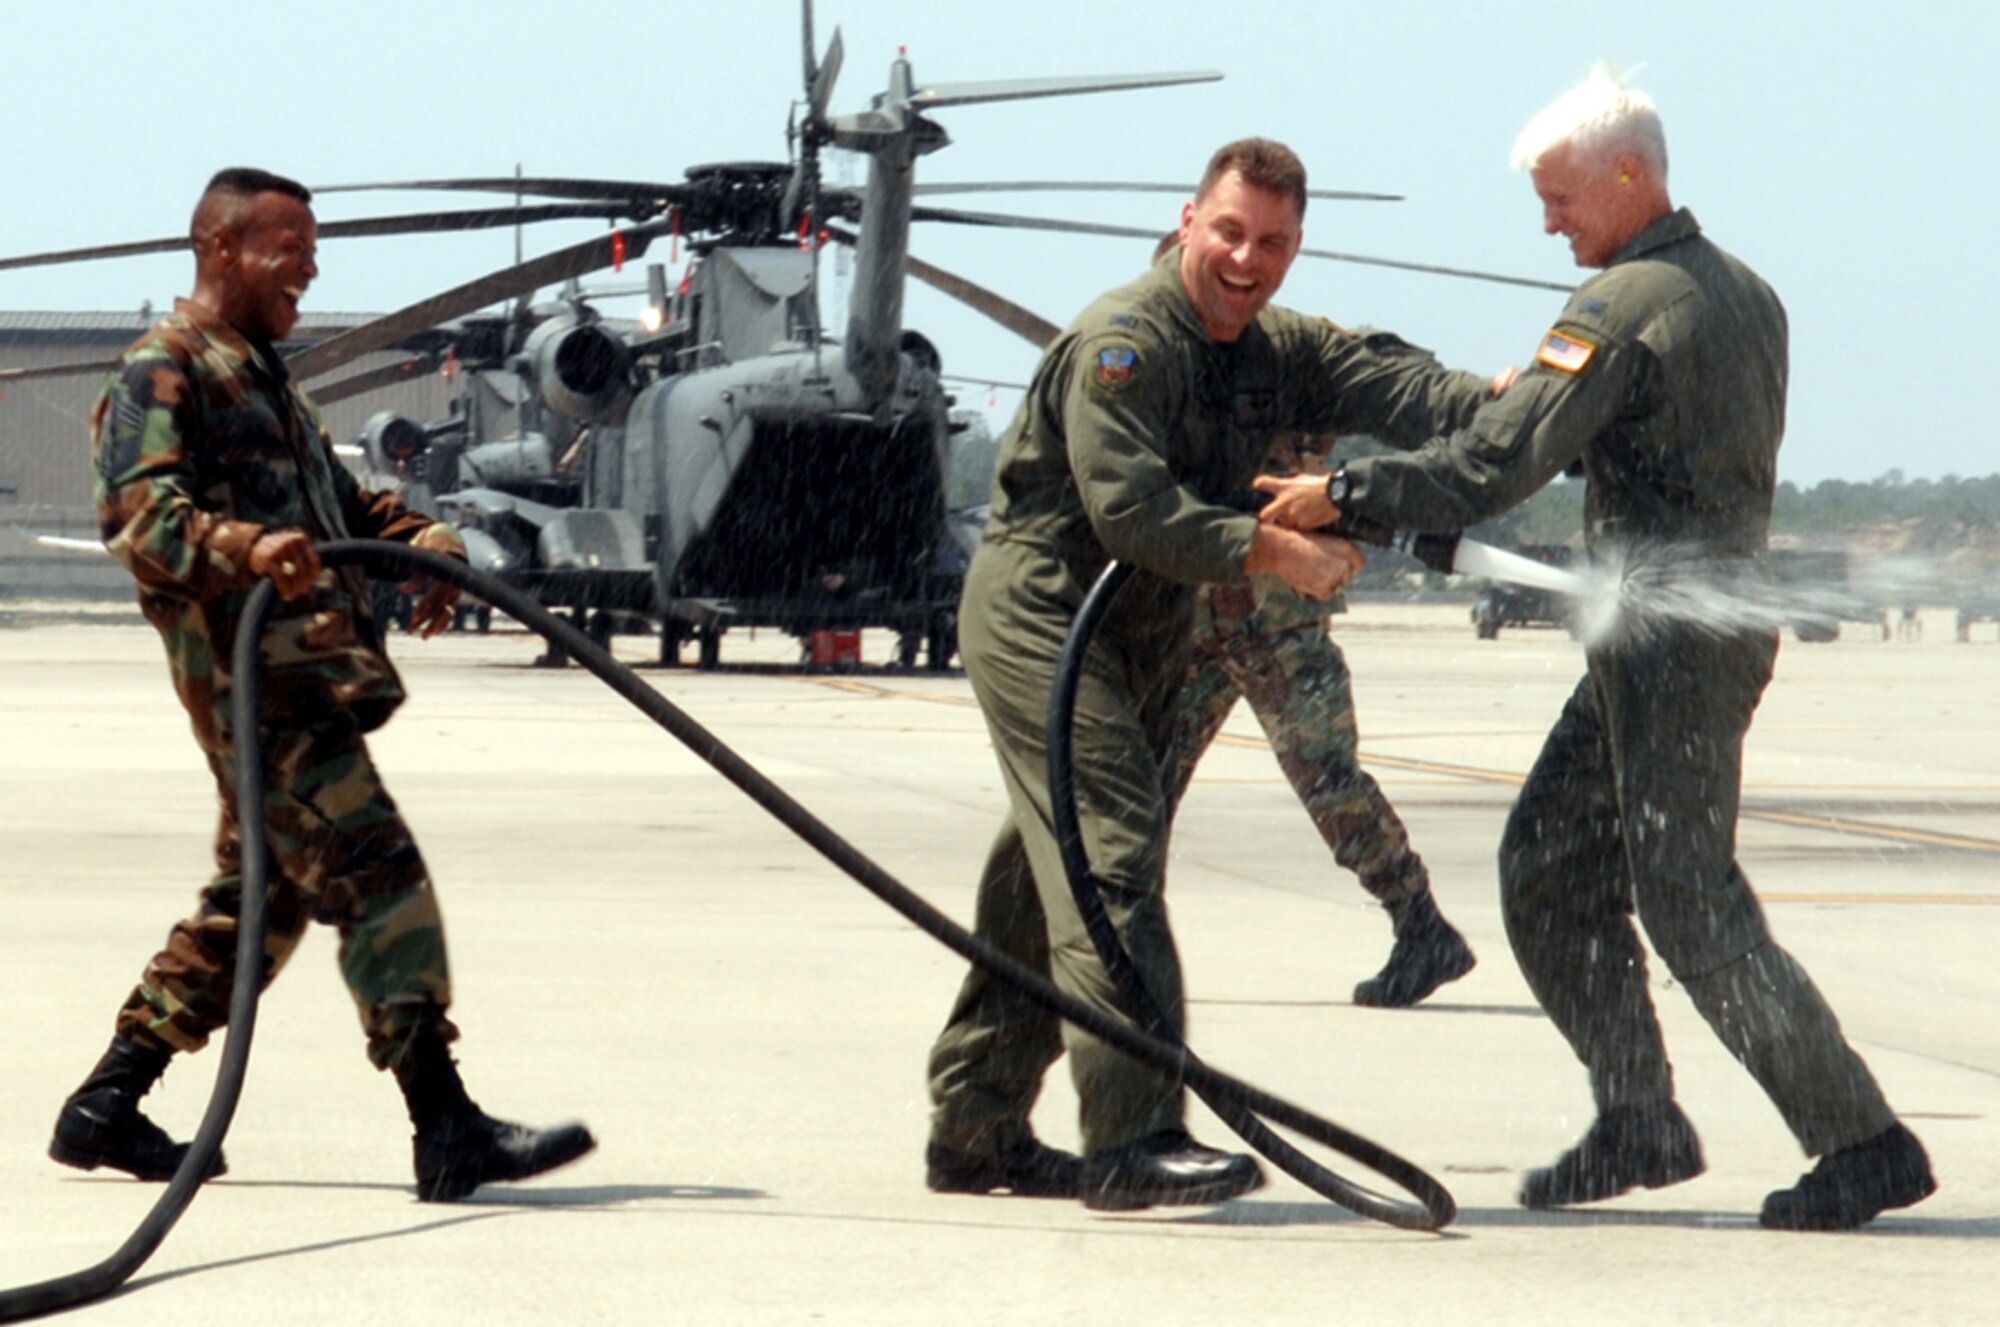 Chief Master Sgt. Jeffrey Richardson, 1st Special Operations Wing command chief, and Col. Timothy Leahy, 1st SOW vice commander, spray down Col. Norm Brozenick Jr., previous 1st SOW commander, after his fini flight June 28. (U.S. Air Force photo/Senior Airman Andy Kin)